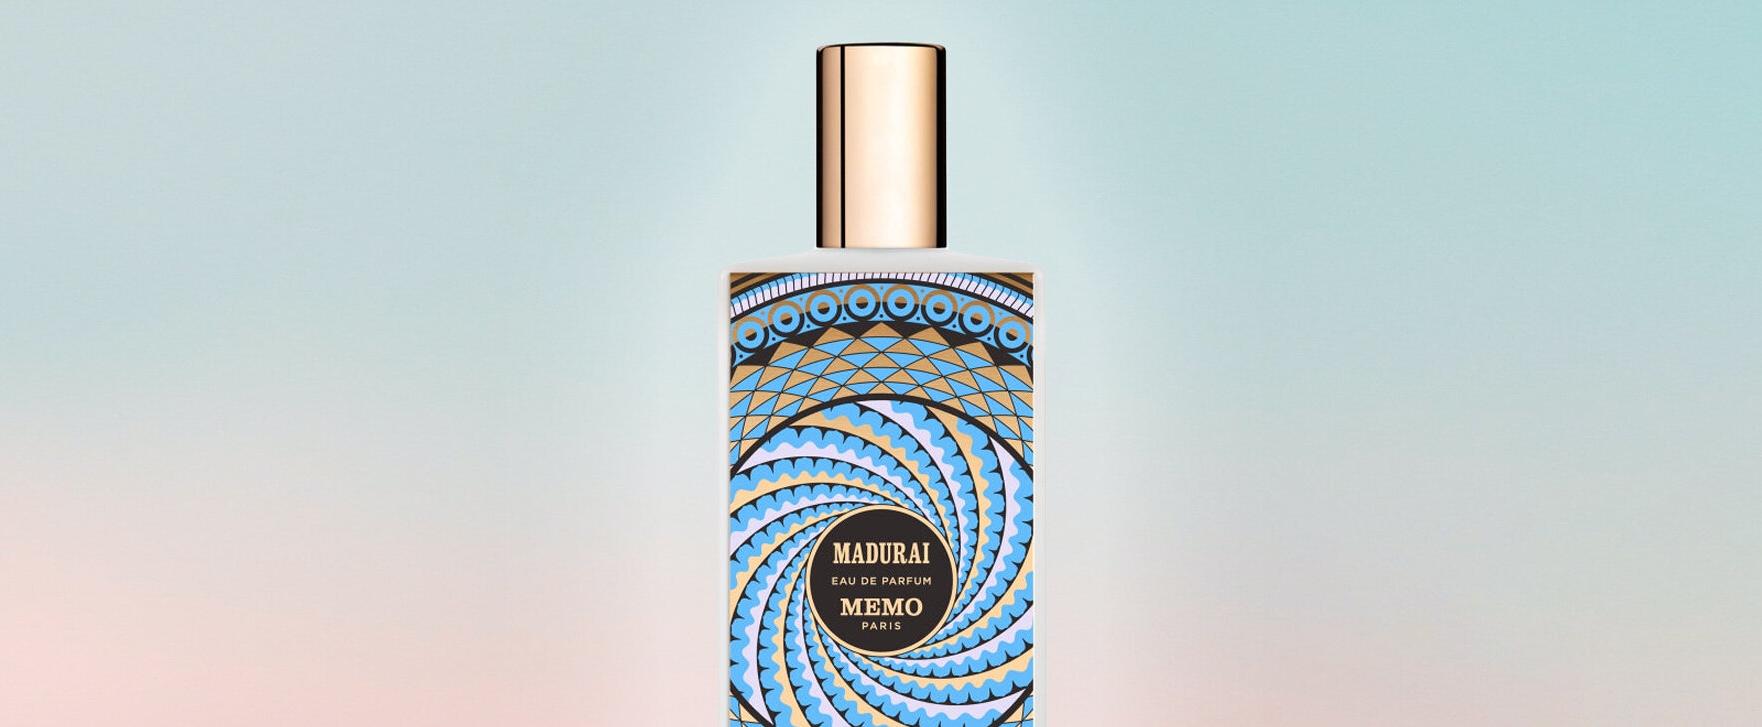 A Scented Journey to India With the New Fragrance “Madurai” From Memo Paris